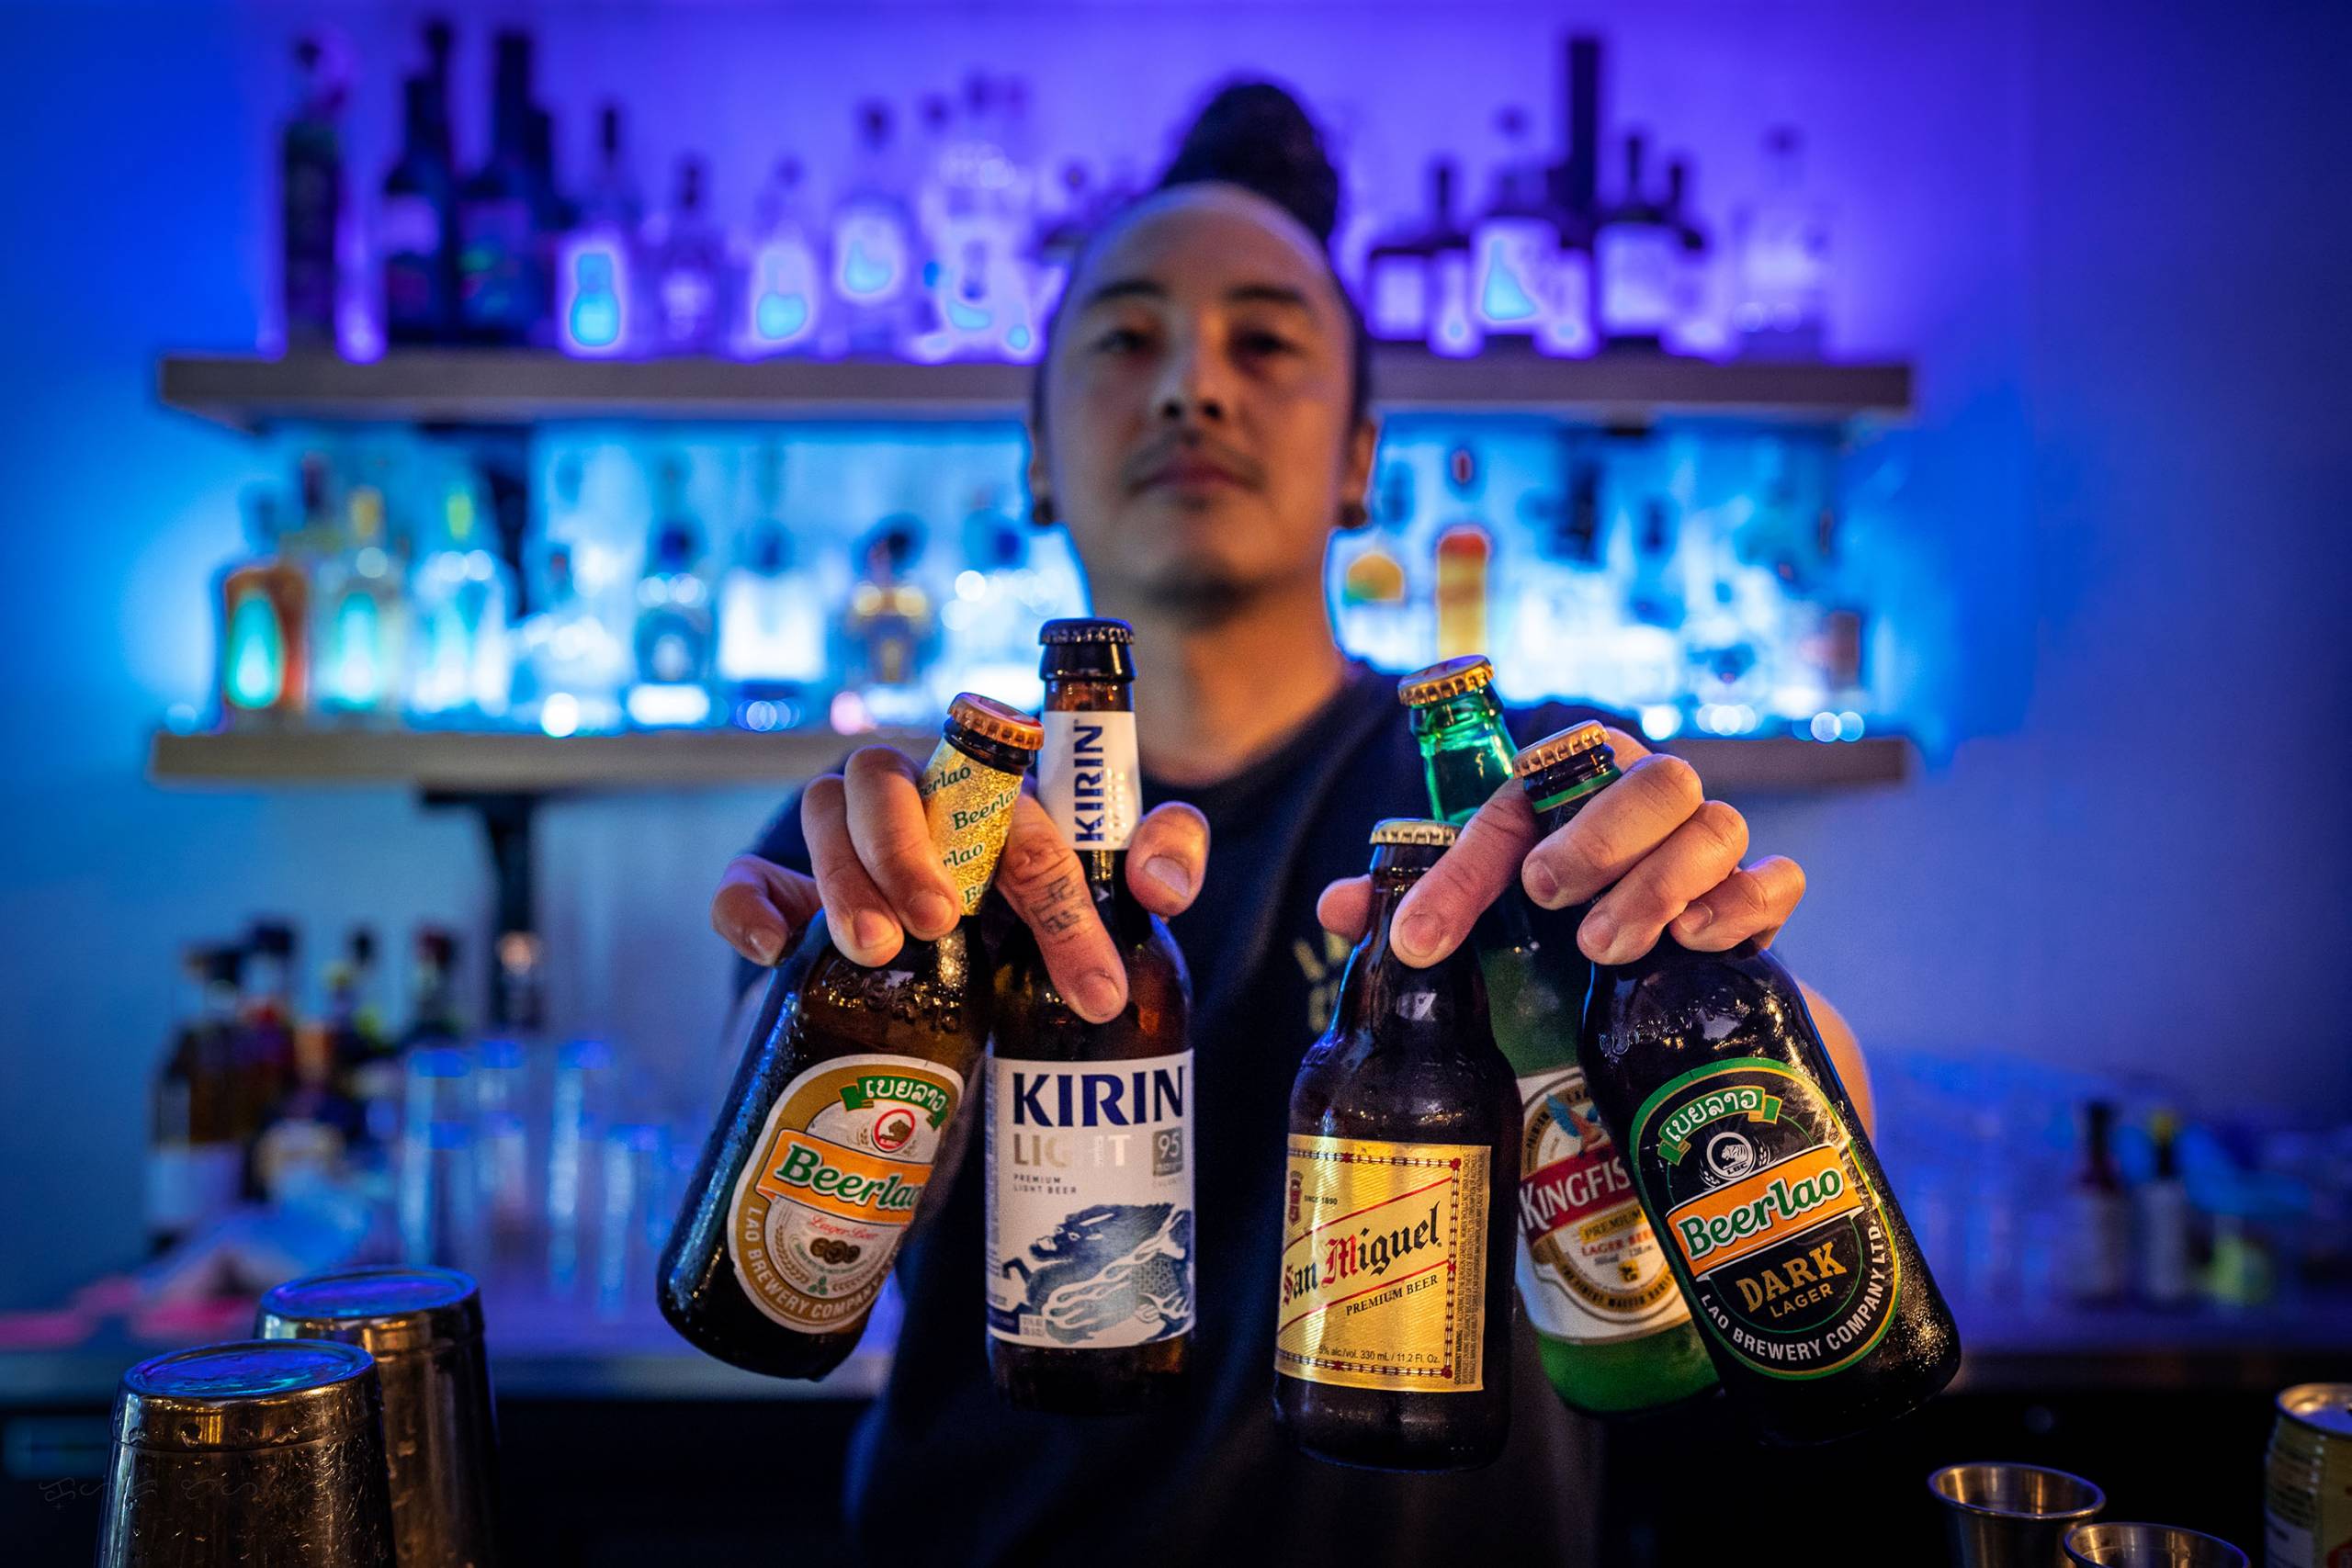 A bartender shows off an array of international beers, including Beerlao, Kingfisher and San Miguel.